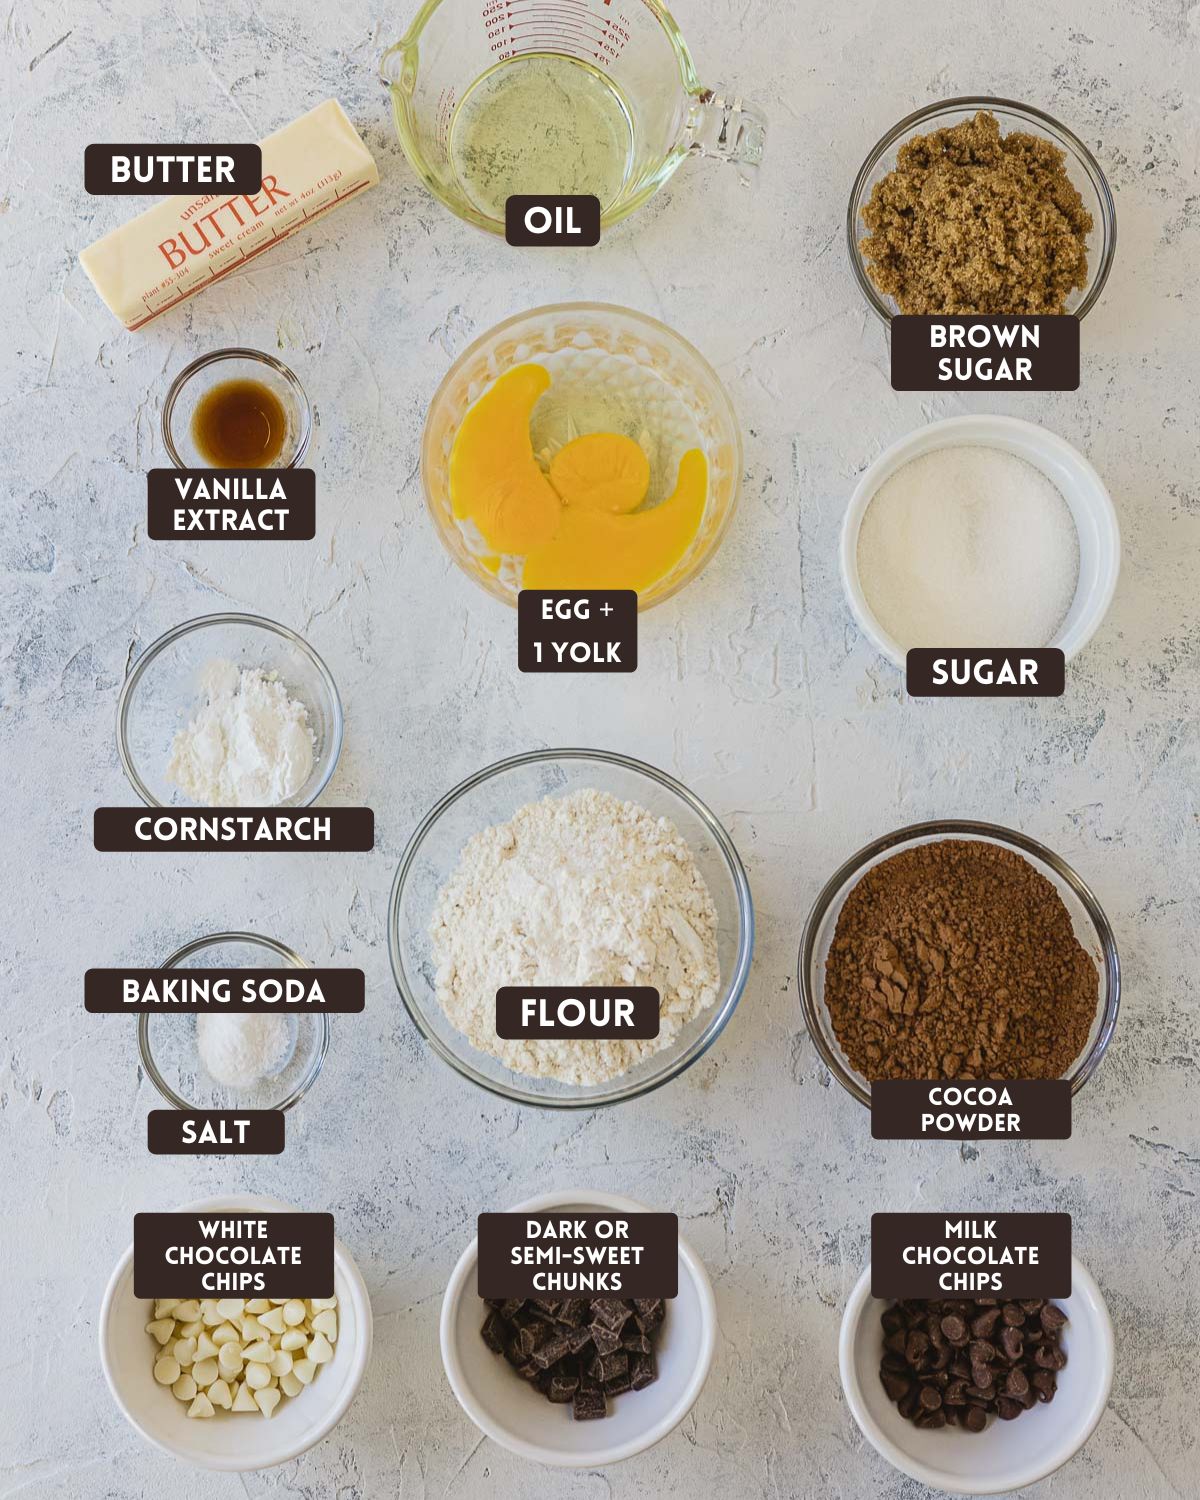 Labeled ingredients for Triple Chocolate Cookies: butter, oil, brown sugar, vanilla extract, eggs, sugar, cornstarch, flour, cocoa powder, baking soda, salt, white chocolate chips, dark or semi-sweet chunks, and milk chocolate chips.